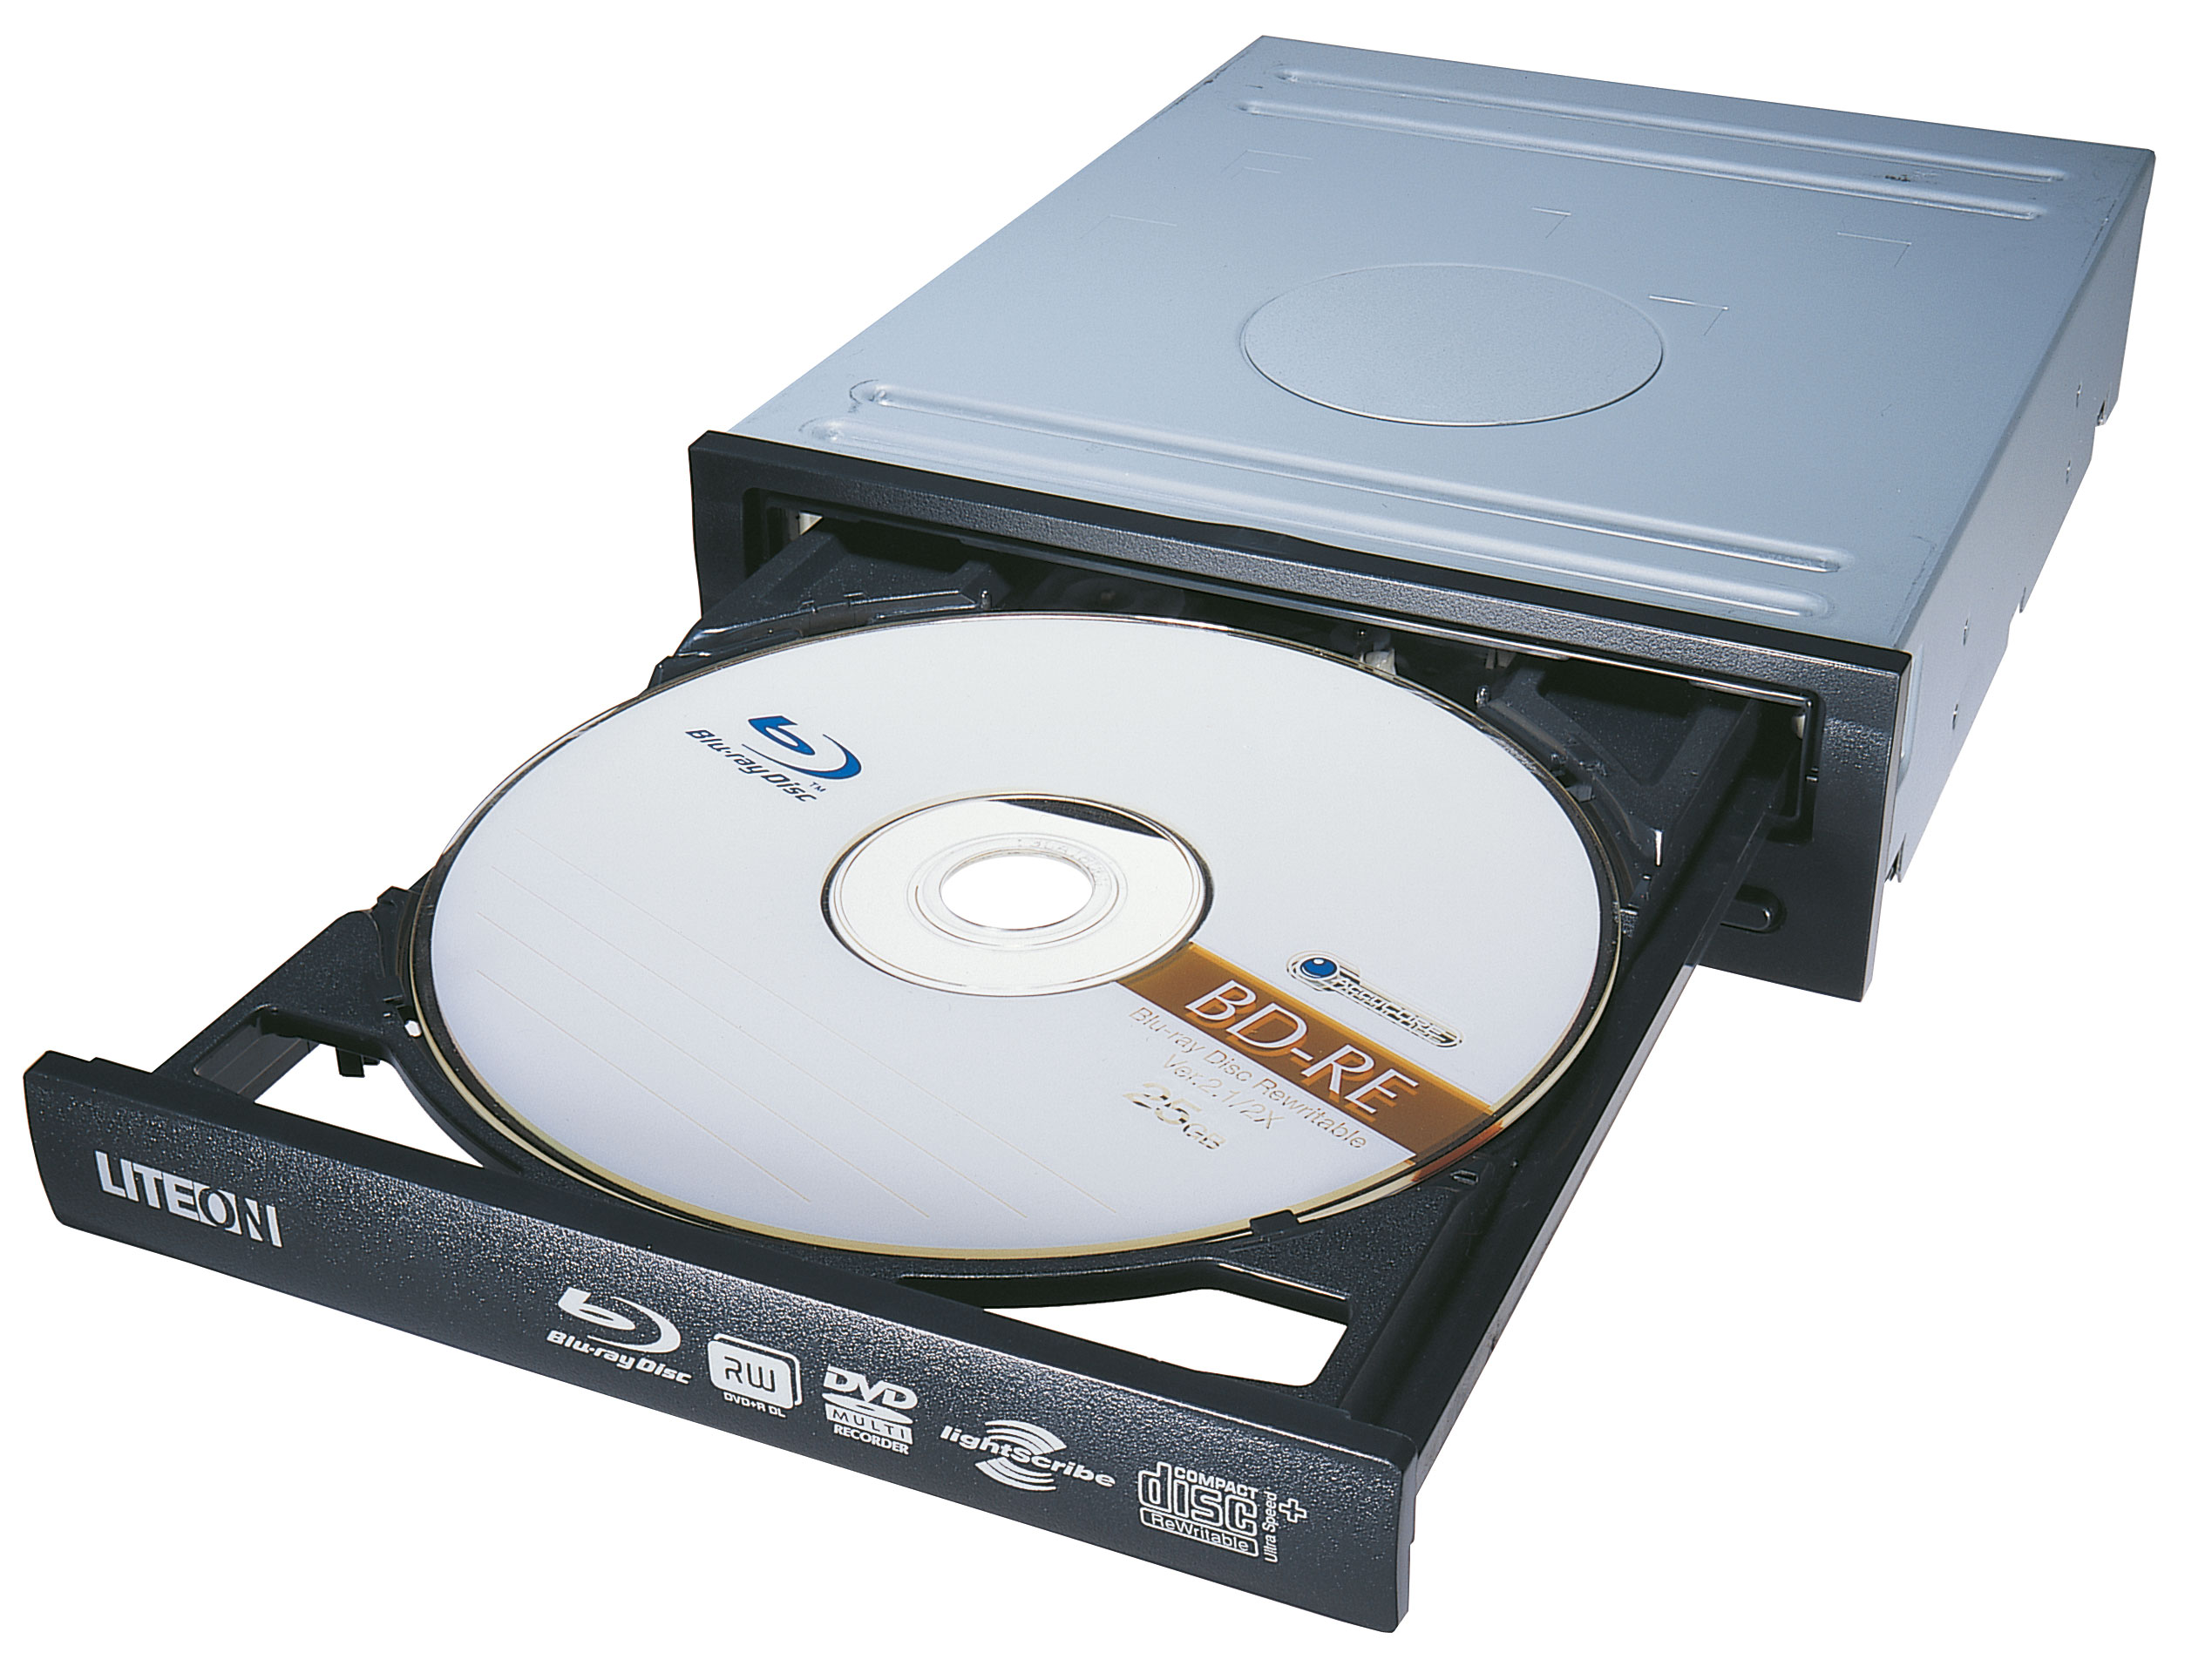 Сд самые самые. CD-ROM (Compact Disk ROM). CD (Compact Disk ROM) DVD (Digital versatile Disc). CD Drive / DVD Drive and. CD ROM x3.